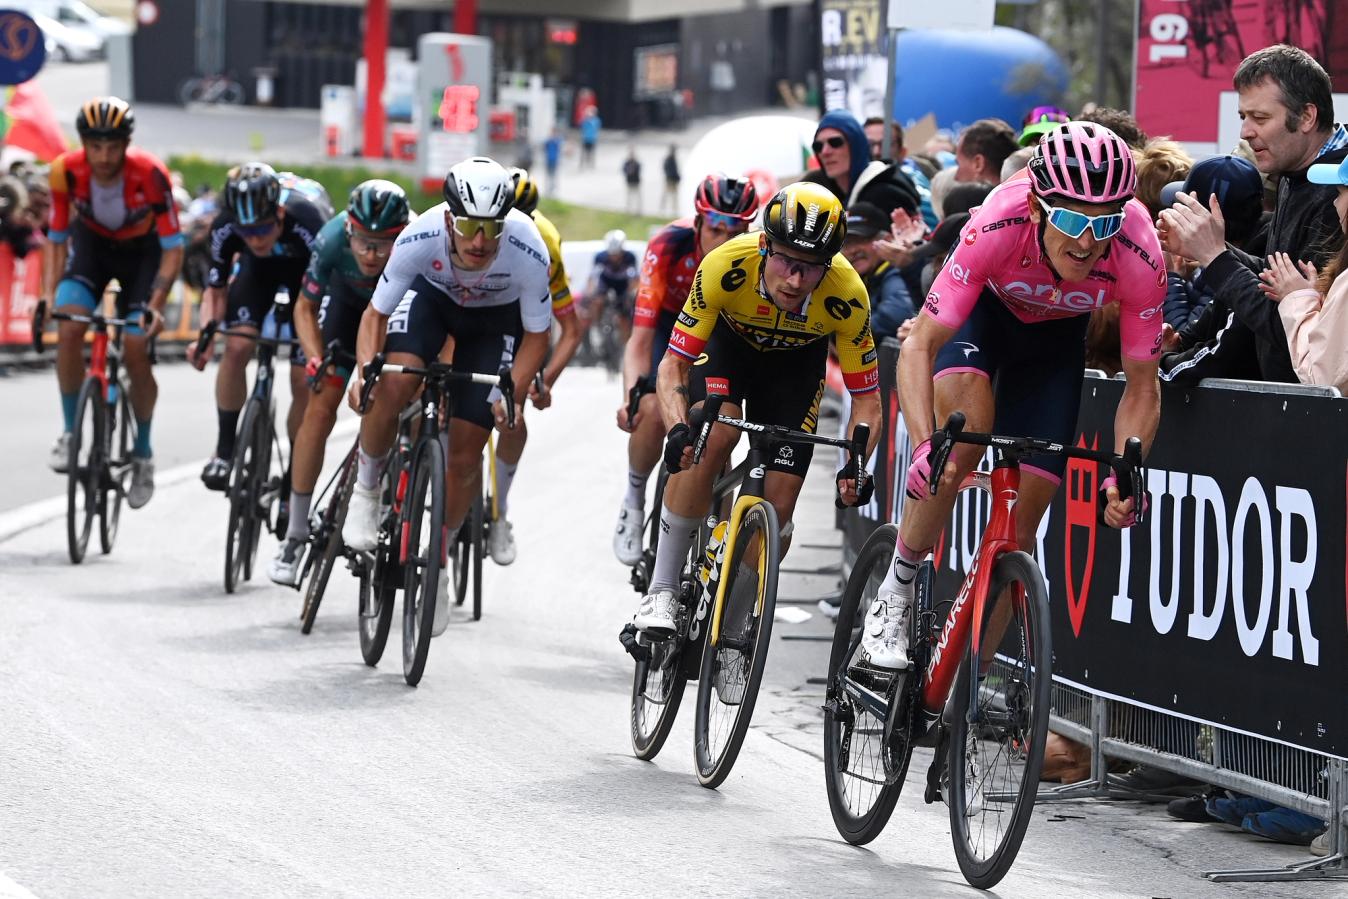 For much of the Giro d'Italia, Geraint Thomas looked set to win, but he couldn't overcome Primož Roglič at his best